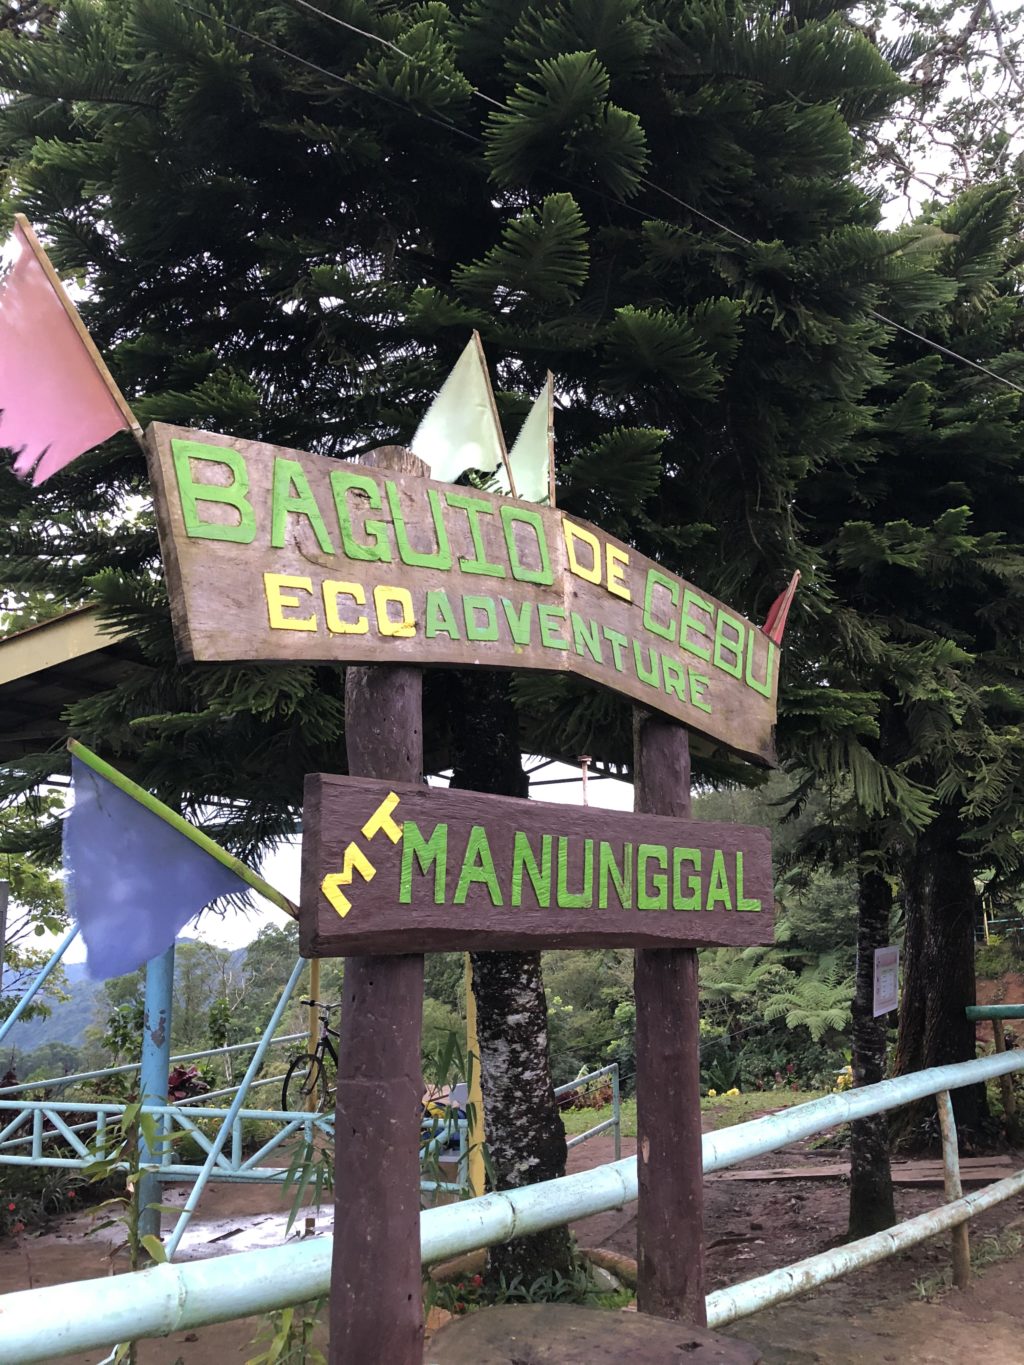 Mt. Manunggal campsite. A campsite dubbed as “Baguio de Cebu” eco-adventure park has been catering to those who want to commune with nature. | CDND File Photo